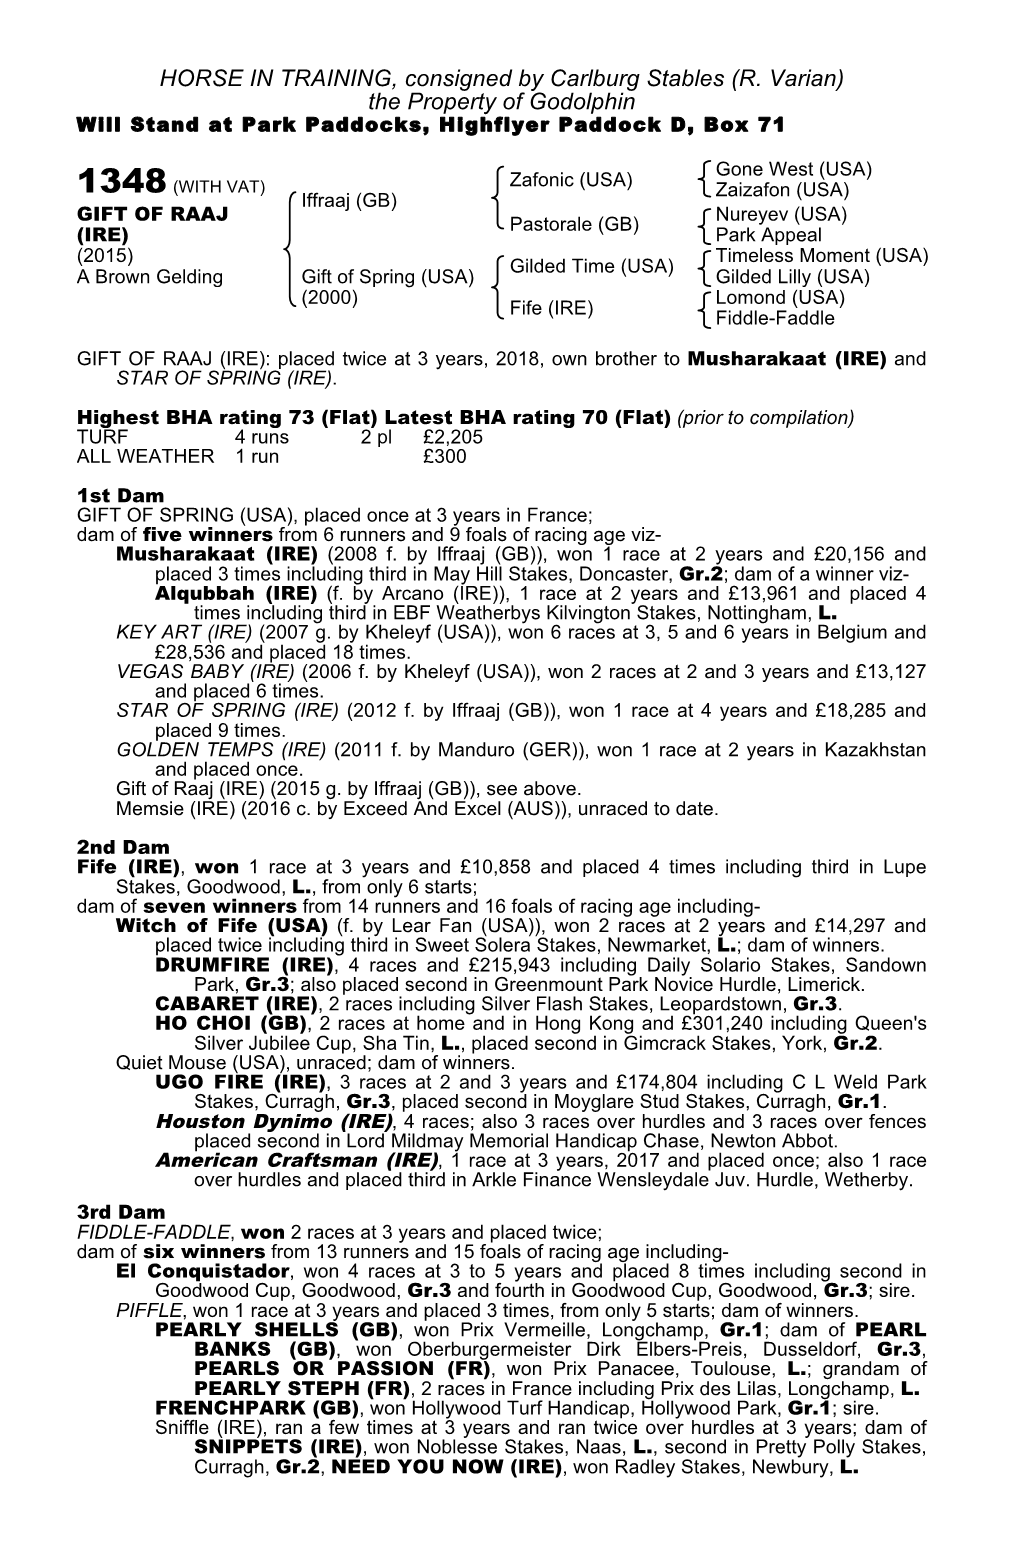 HORSE in TRAINING, Consigned by Carlburg Stables (R